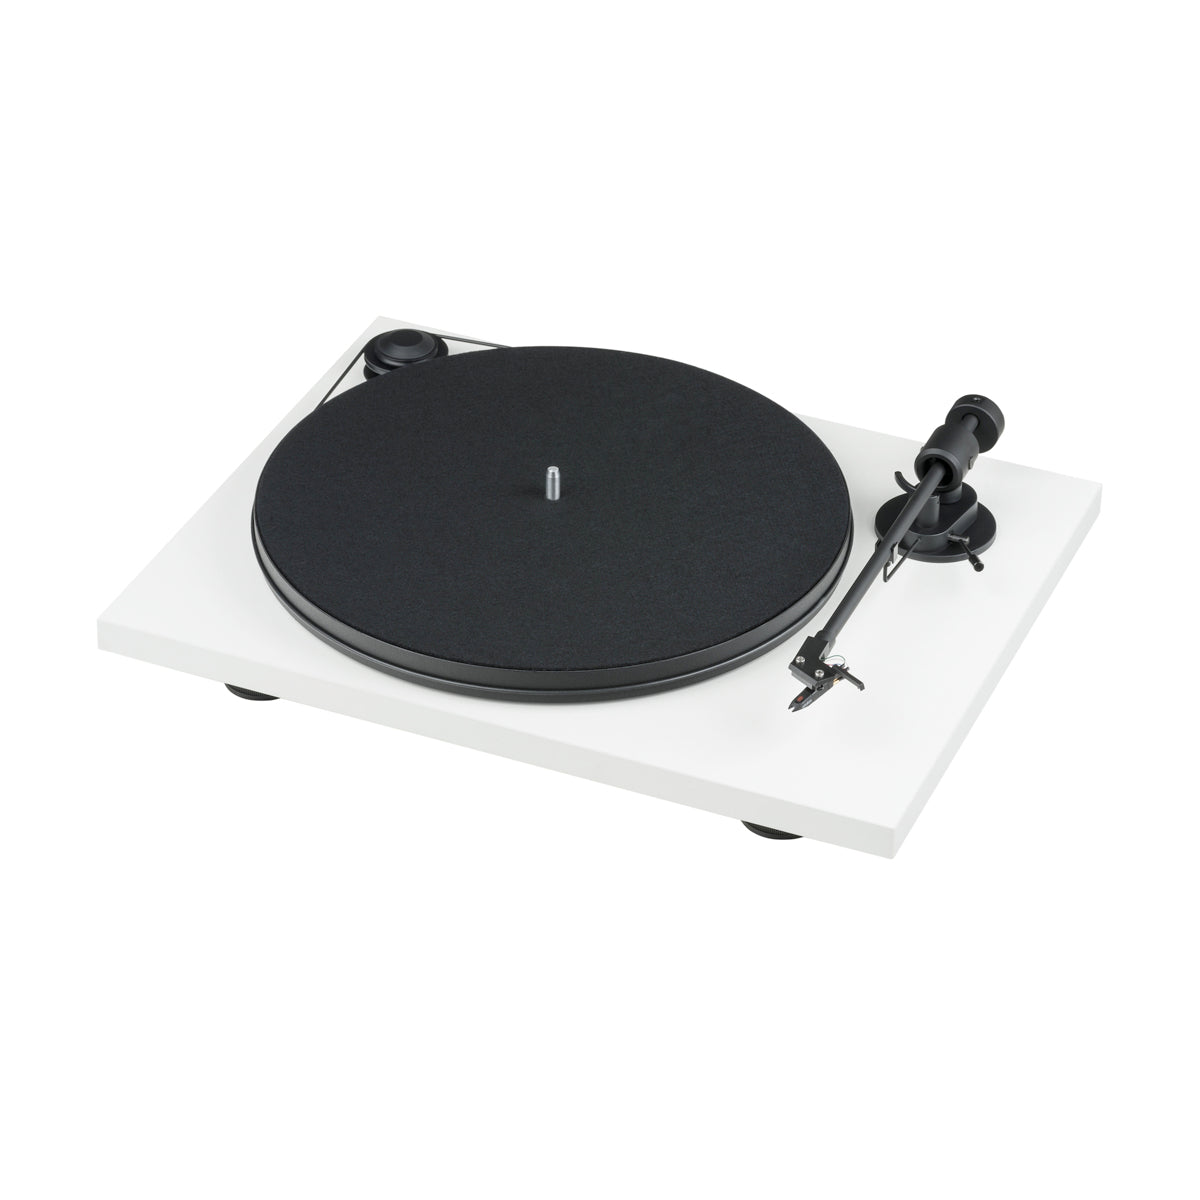 Pro-Ject Primary E Phono Turntable with OM Cartridge - White - The Audio Experts